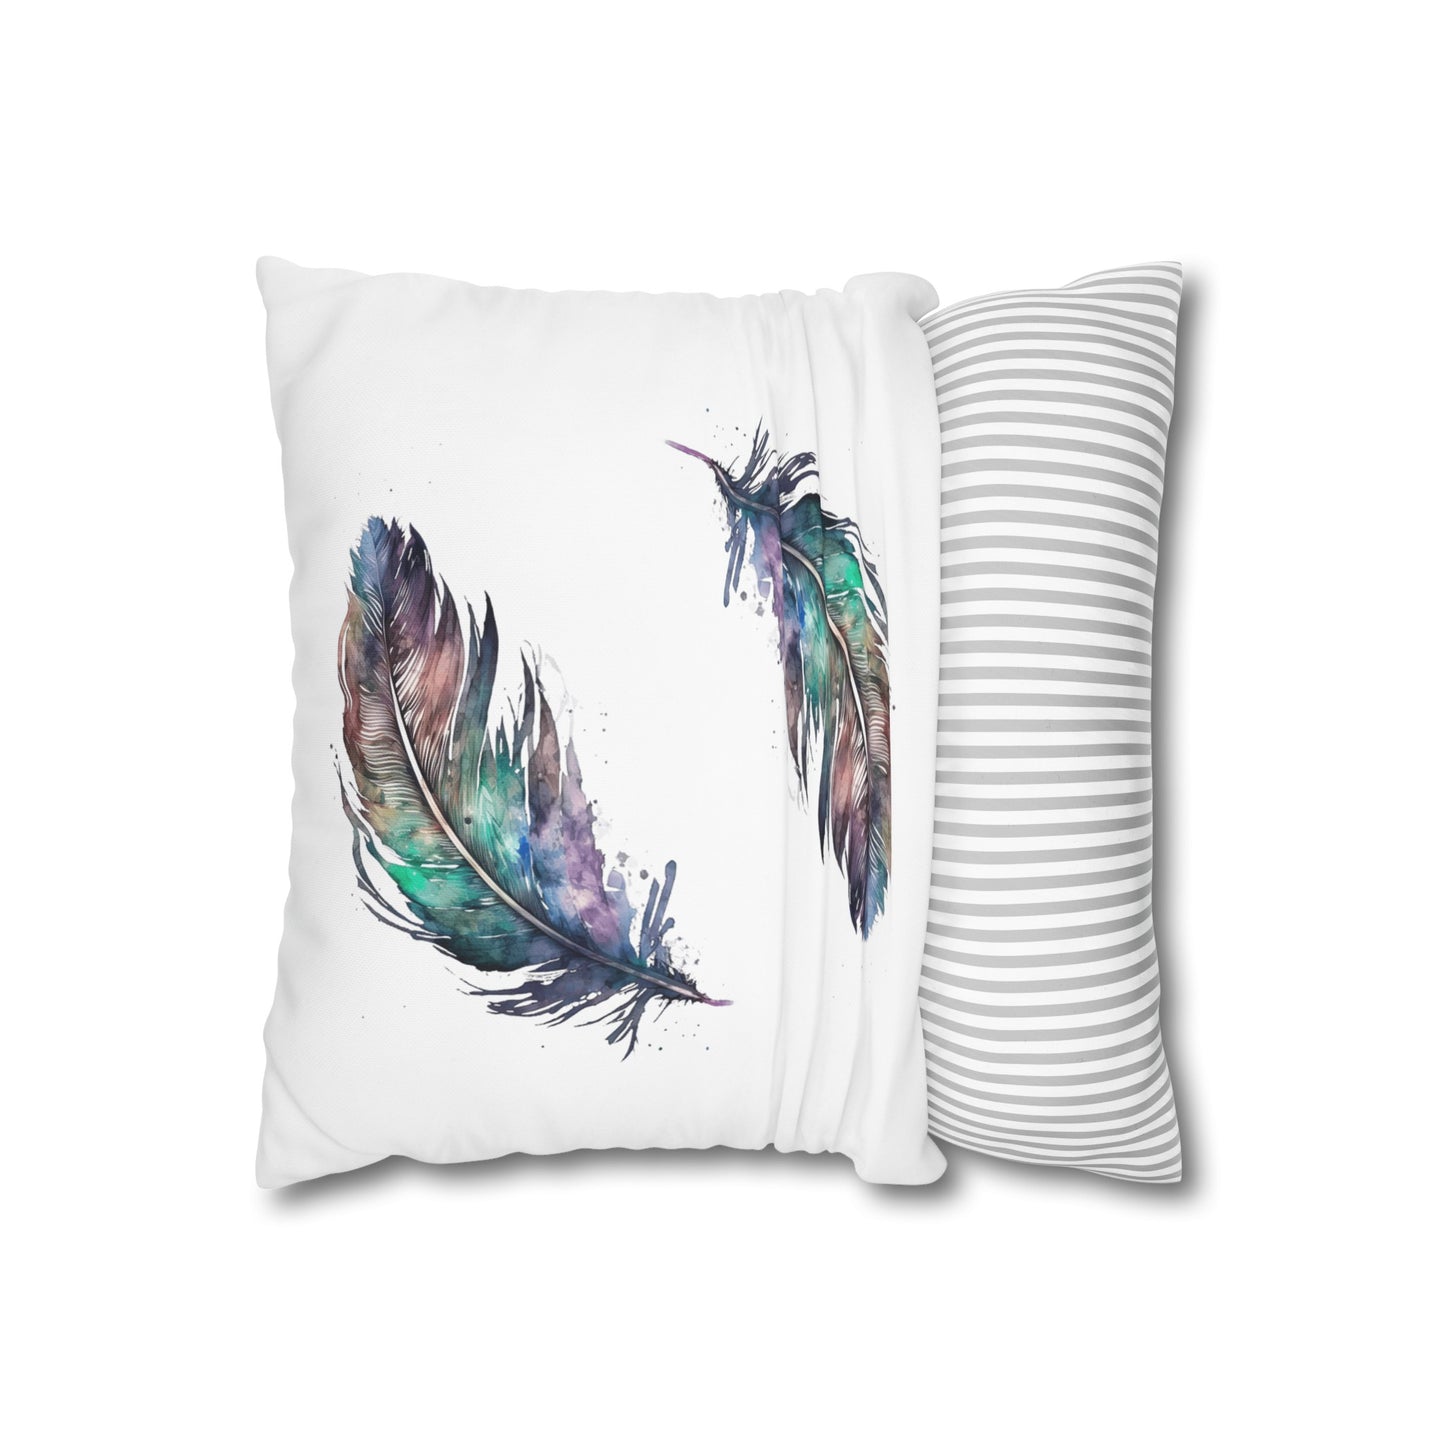 Feather On The Wind #14 Canvas Cushion Cover